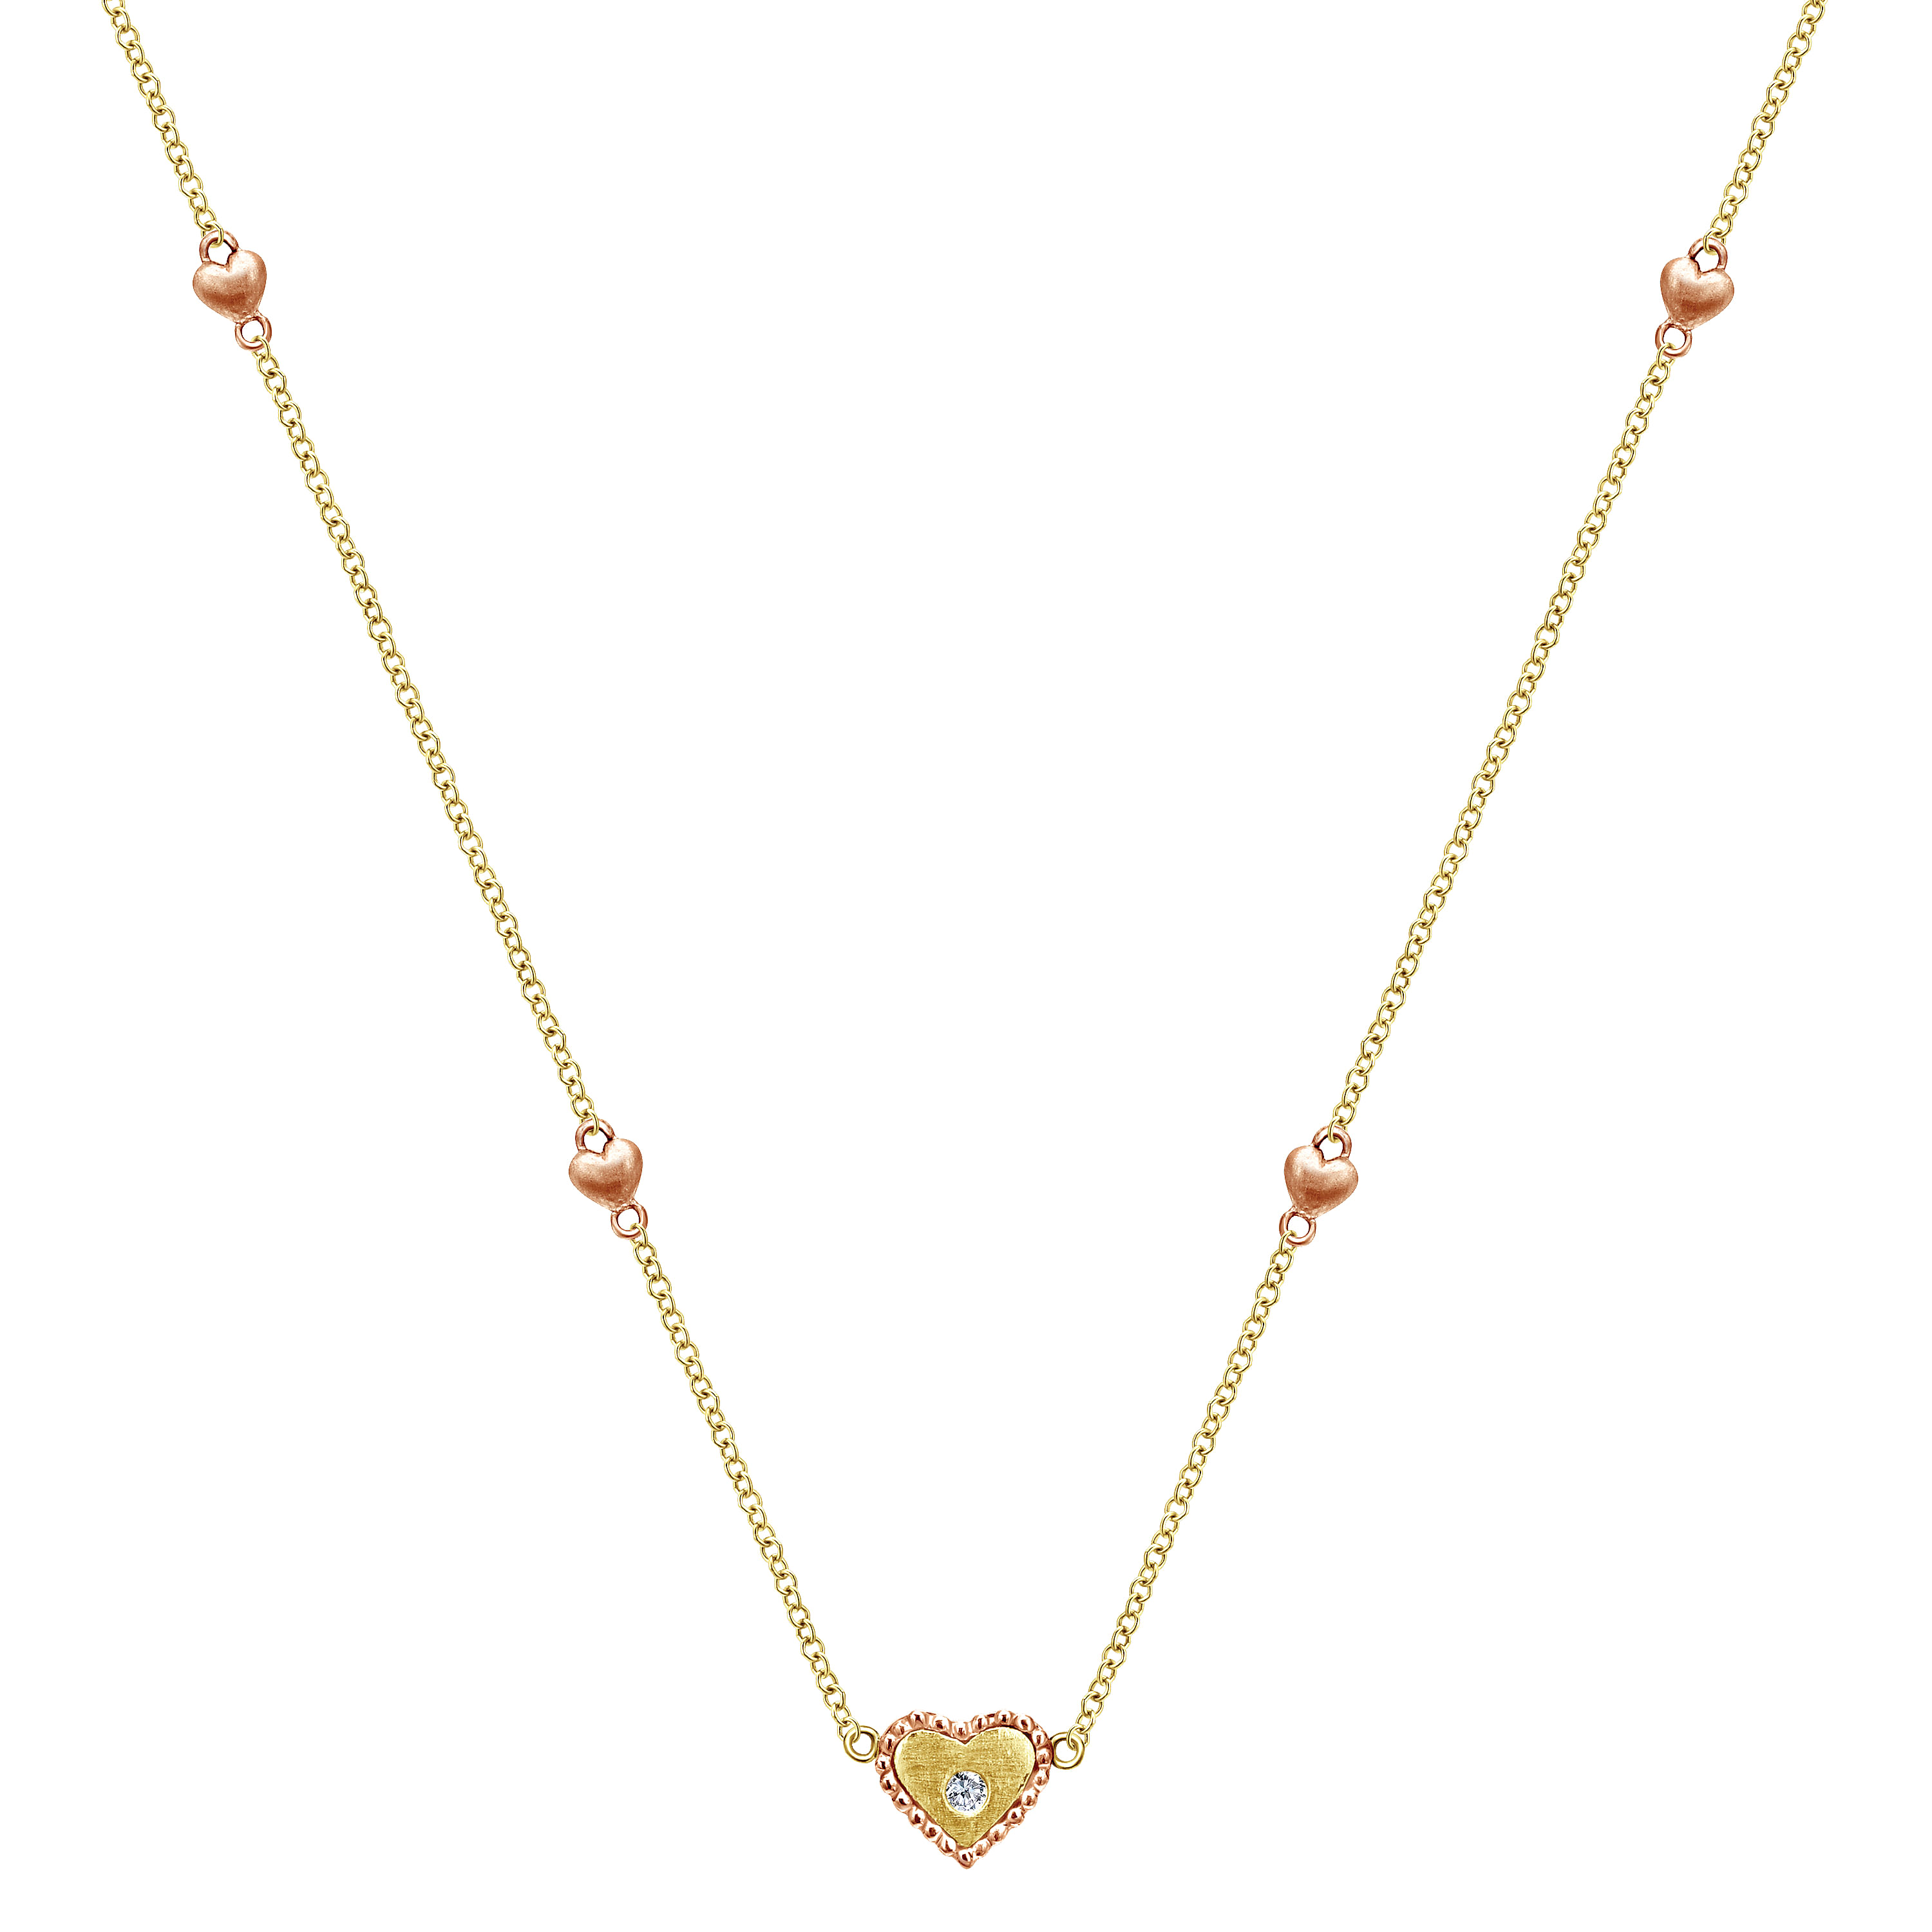 14k Yellow/Rose Gold Diamond Heart Station Necklace